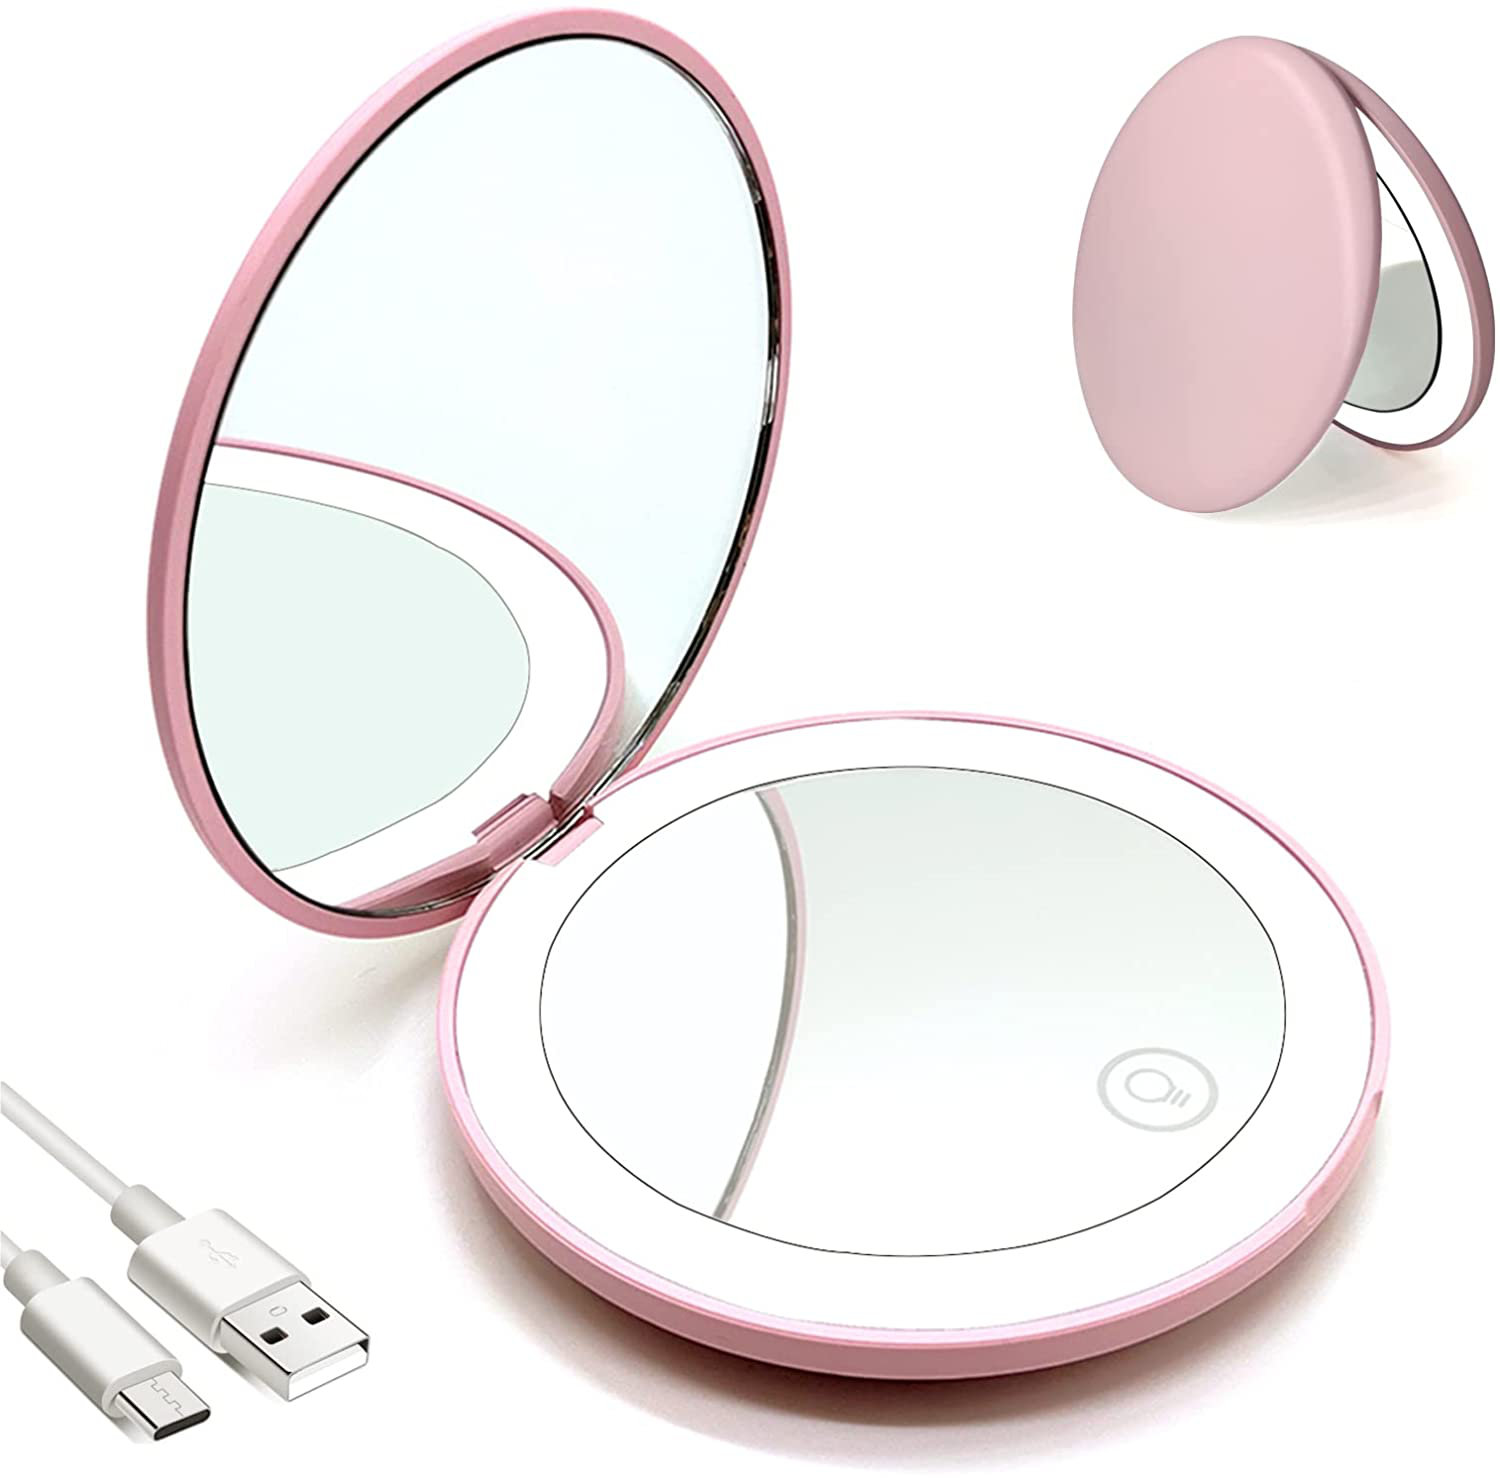 Purse and Handbags,1X /10X Mag Elegant Compact Lighted Makeup Mirror for Travel